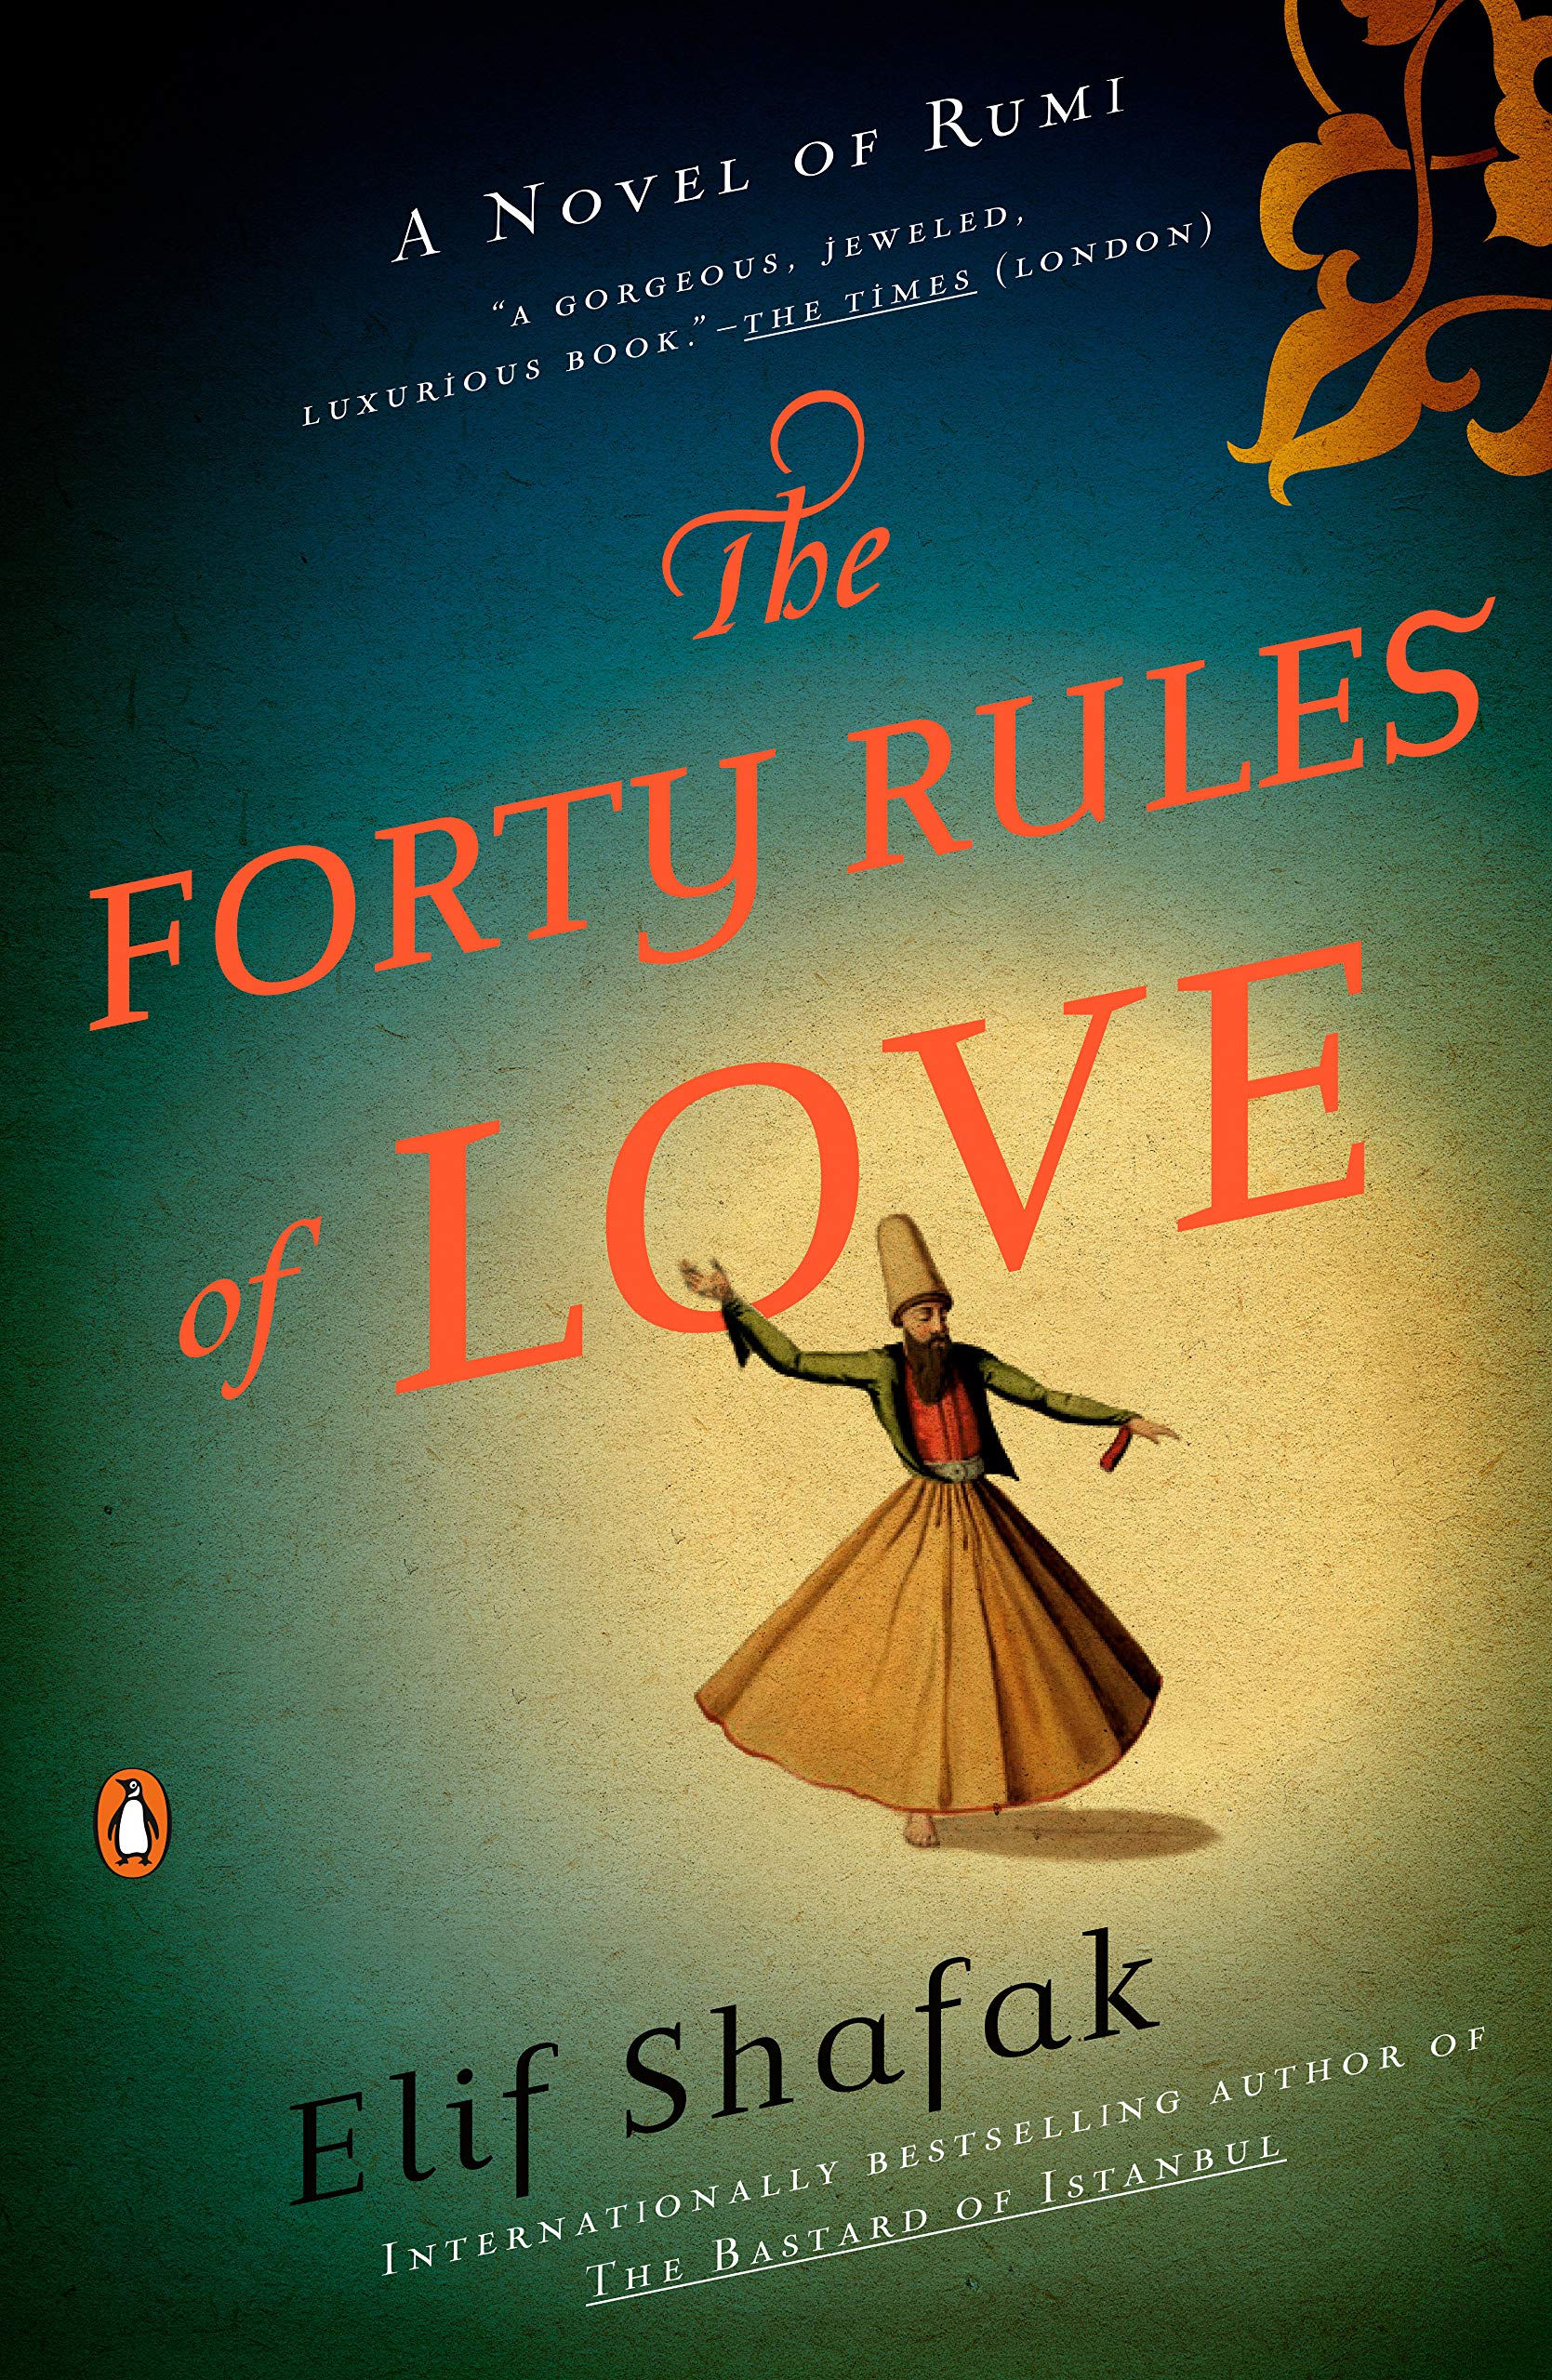 The Forty Rules of Love- A Novel of Rumi